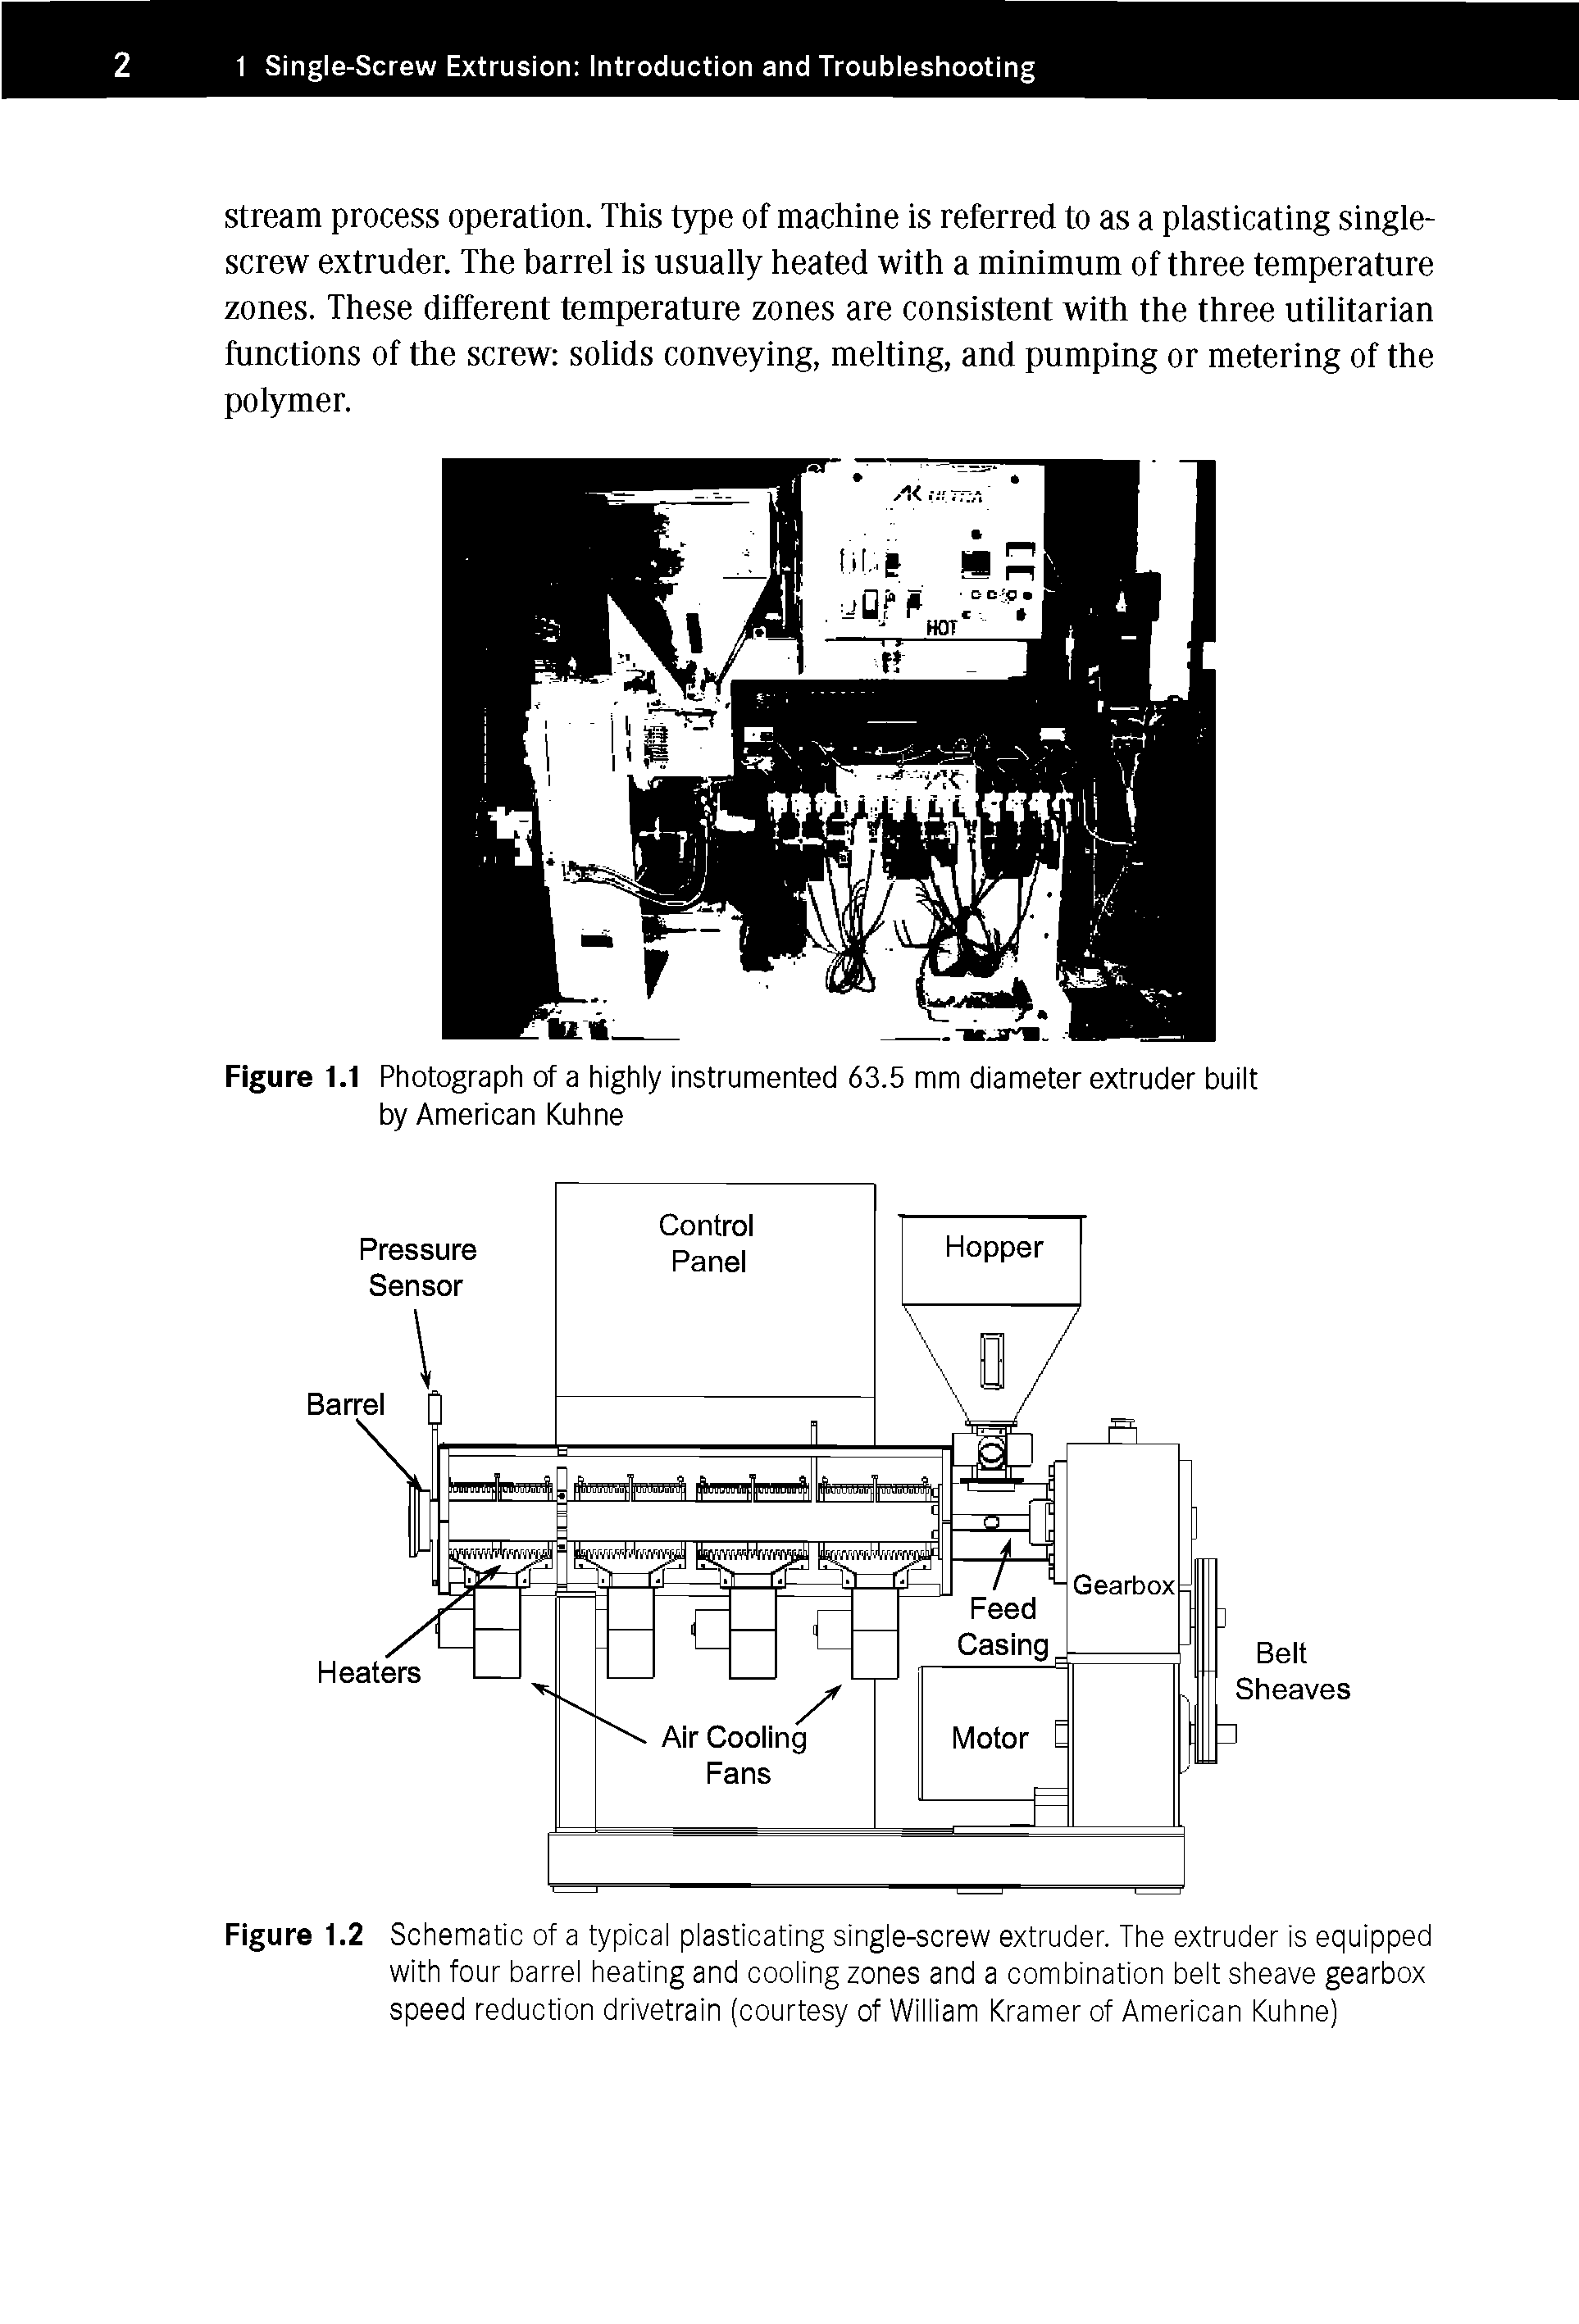 Figure 1.2 Schematic of a typical plasticating single-screw extruder. The extruder is equipped with four barrel heating and cooling zones and a combination belt sheave gearbox speed reduction drivetrain (courtesy of William Kramer of American Kuhne)...